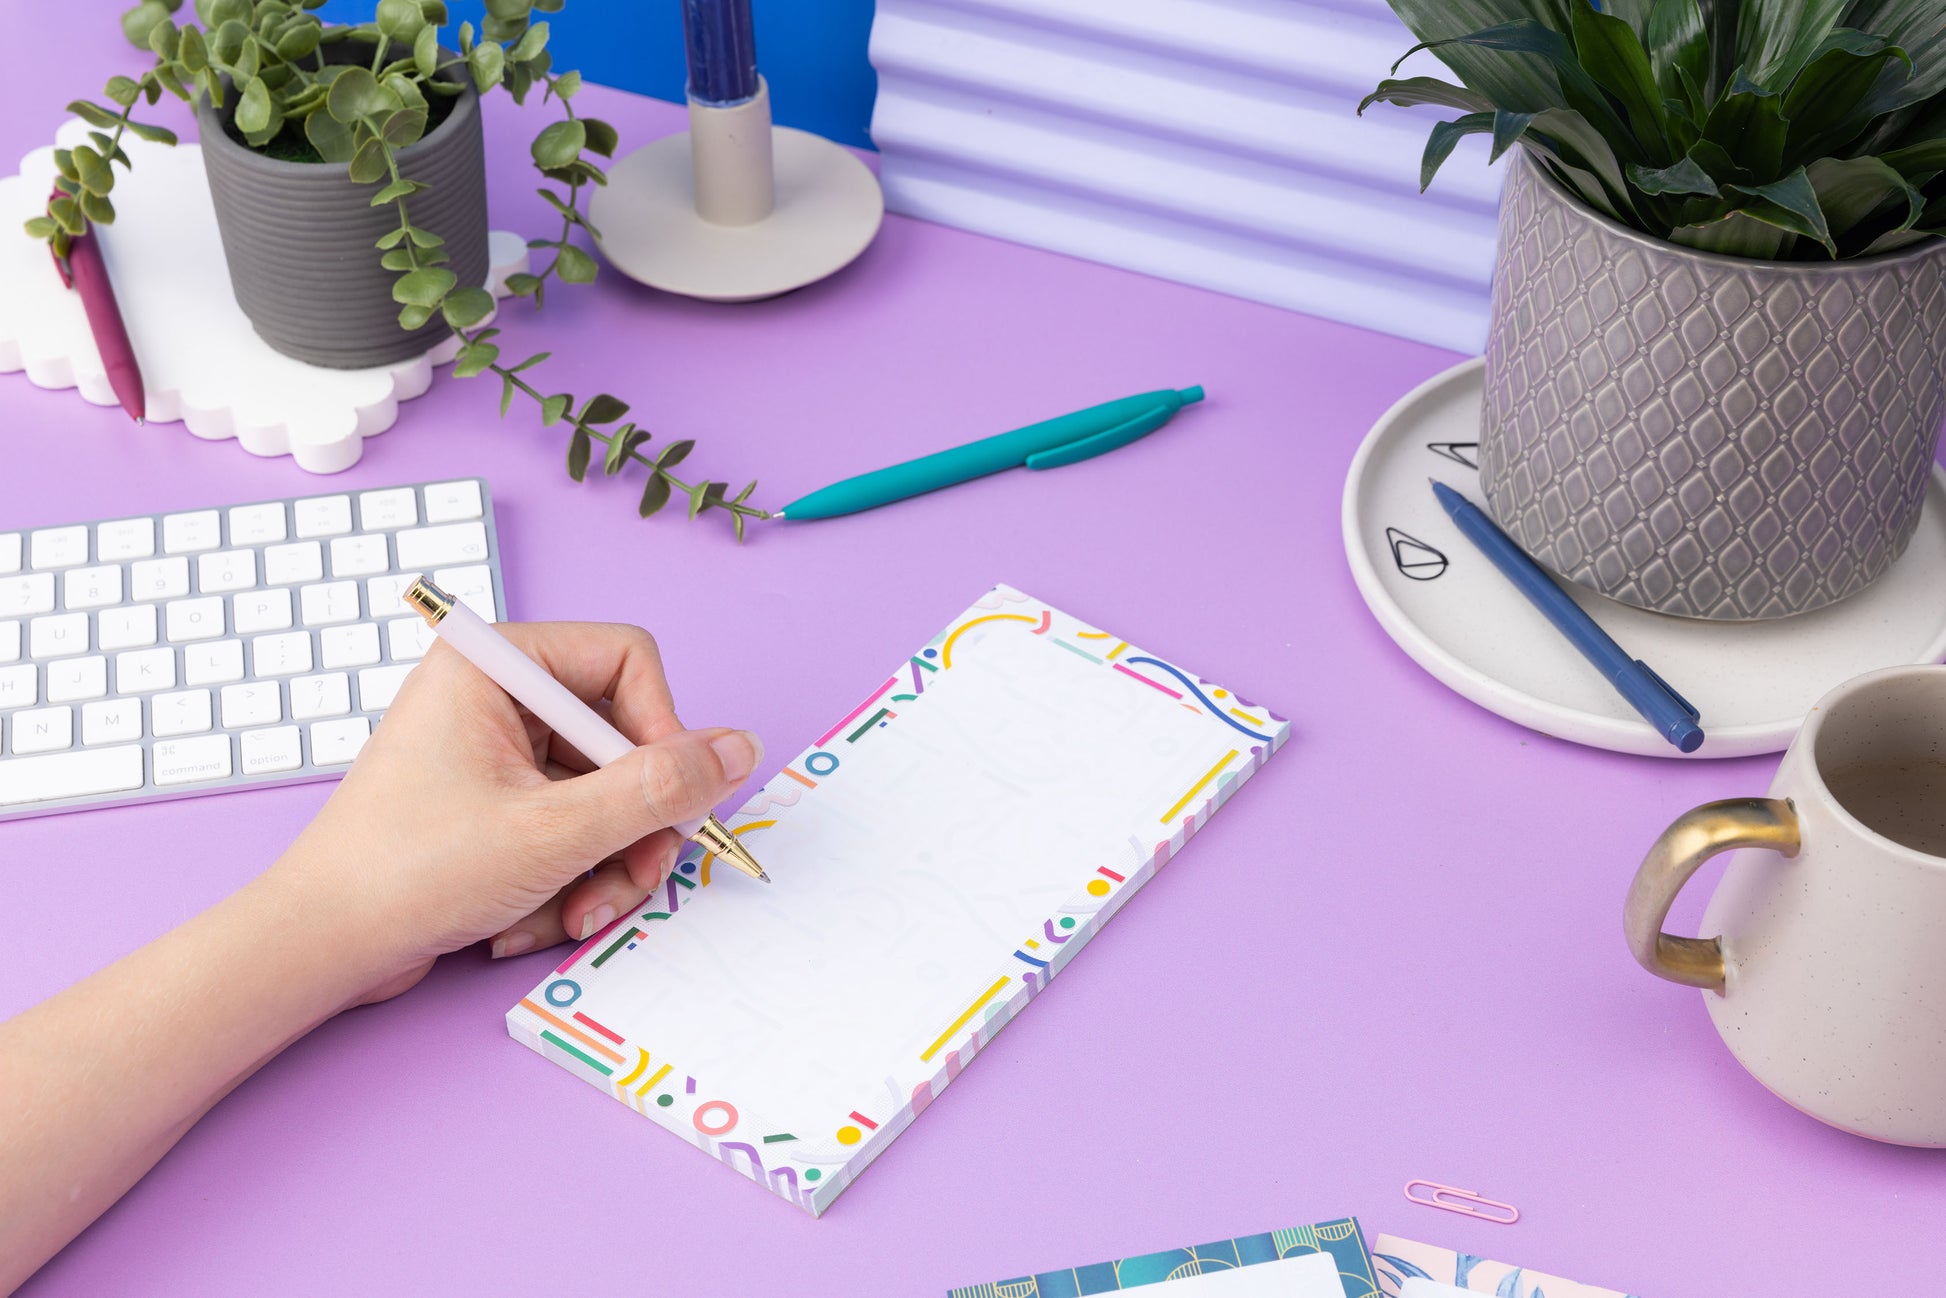 Cutouts List pad is on a lilac desk, with a left hand to its left holding a pen to write on it.  There is a small plant, white keyboard and a mug also on the desk around it. 